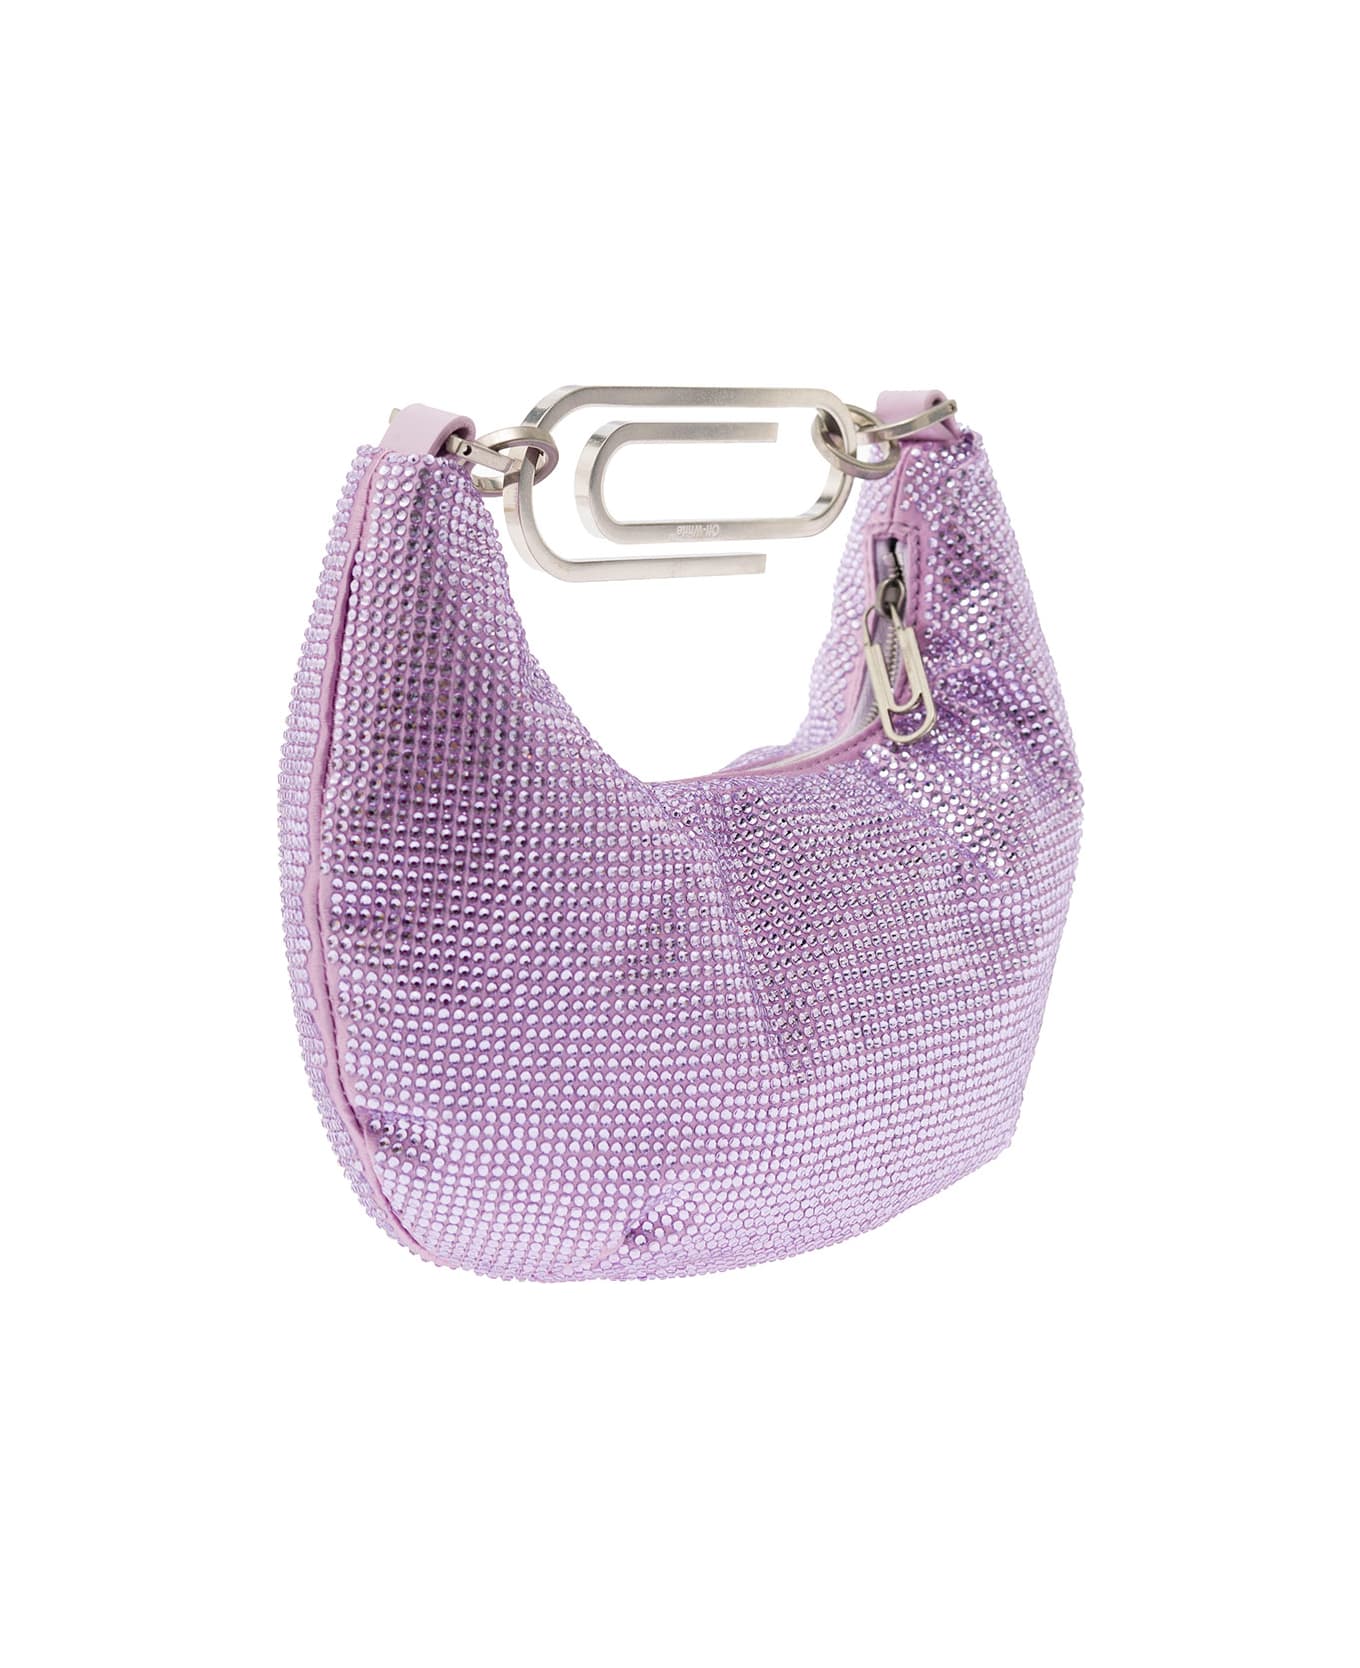 Off-White Paperclip Hobe Strass Bag - Violet